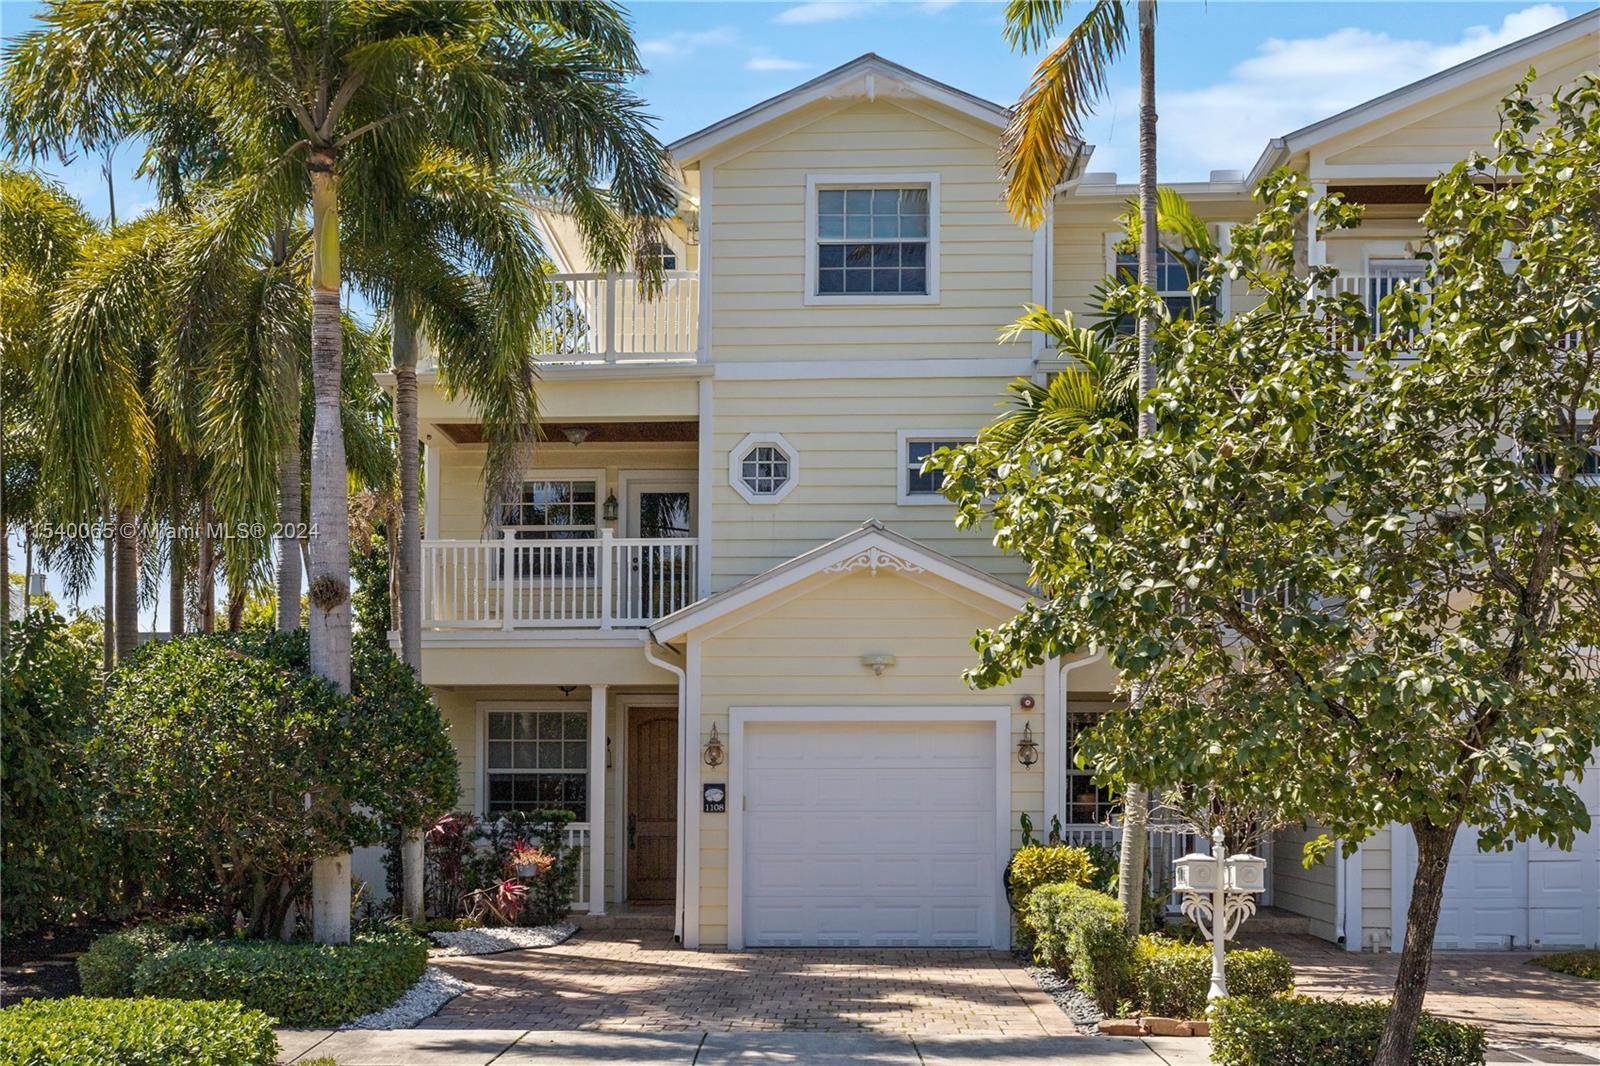 Stylish Key West living located in the heart of Victoria Park. Prime corner townhouse with NO HOA, o